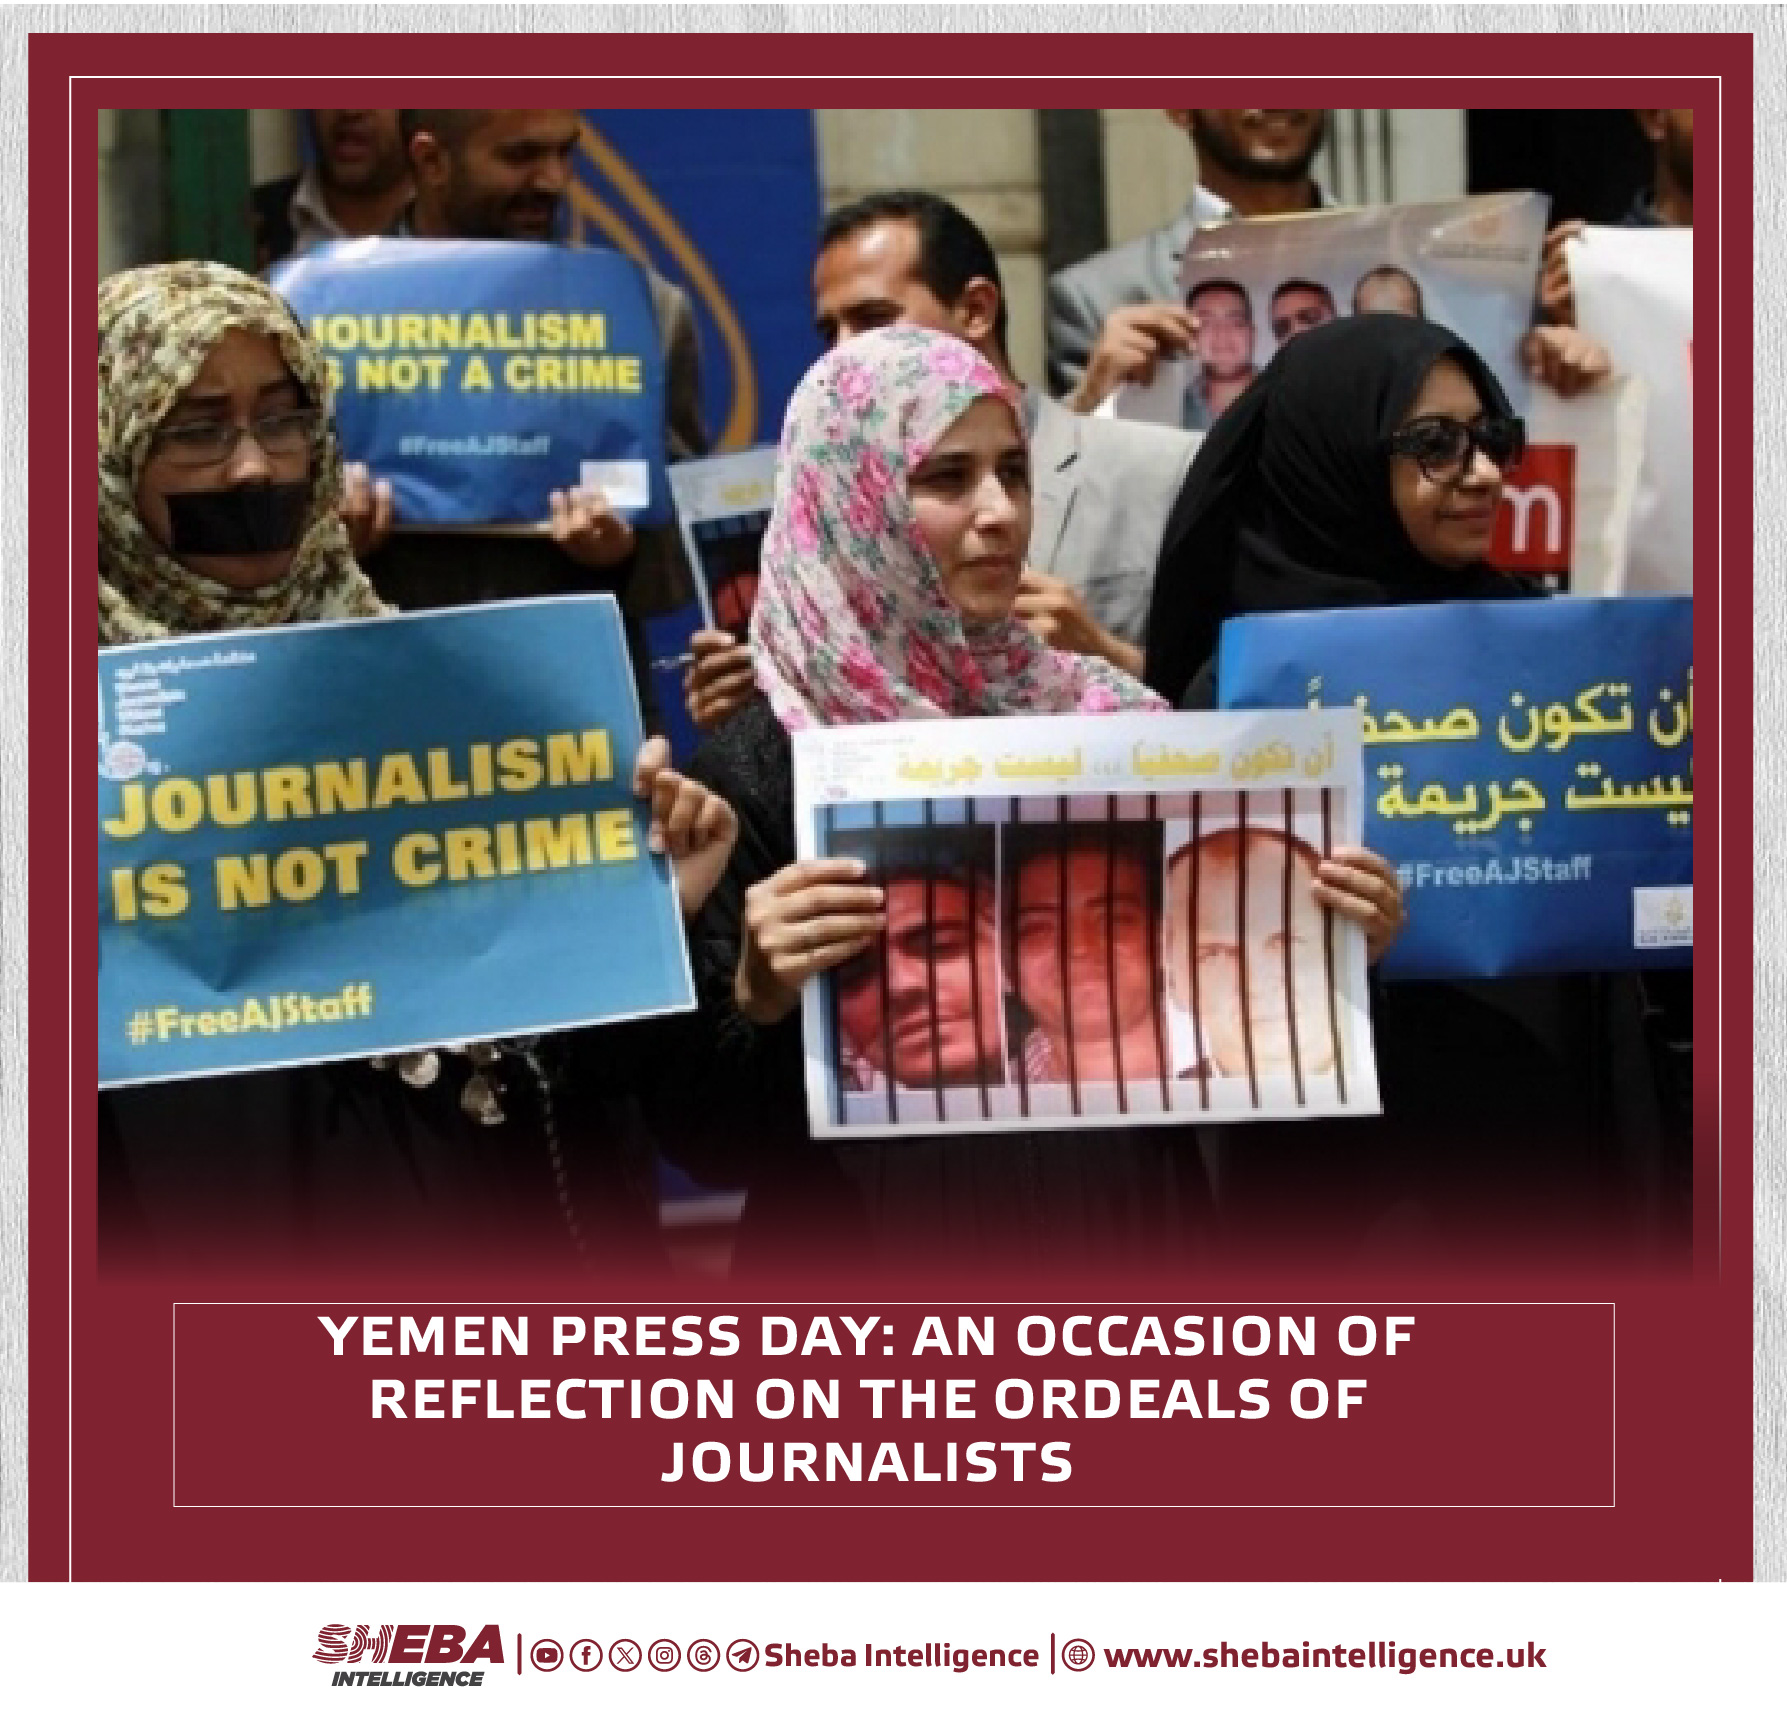 Yemen Press Day: An Occasion of Reflection on the Ordeals of Journalists